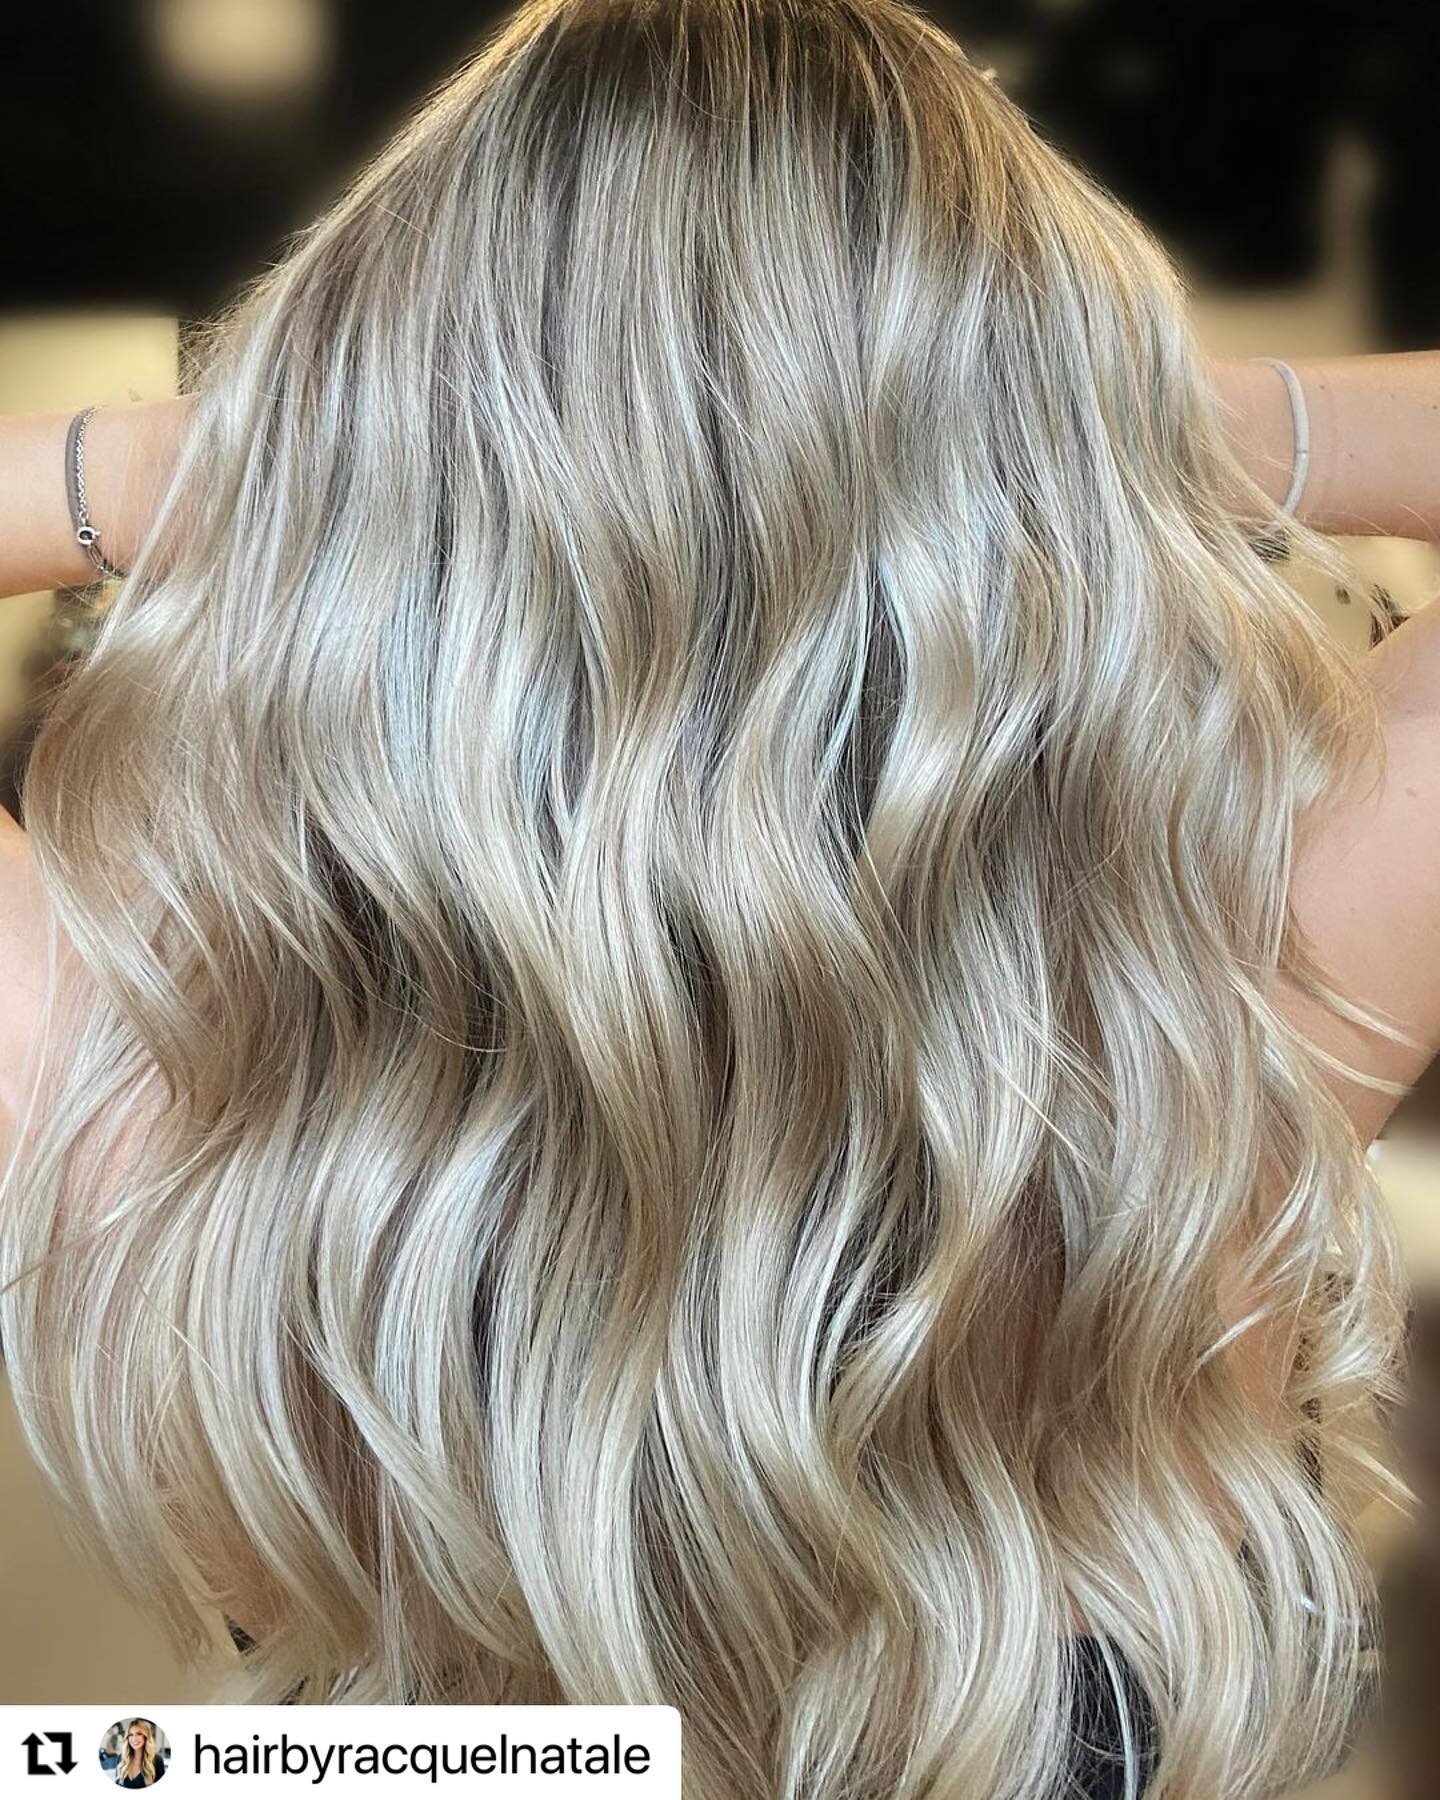 Are you feeling BEACHY yet ???🏖🏖🏖

#goldwellcolor @goldwellus #topchicgoldwell #topchic #orbieobsessed #orbiehair #behindthechairstylist #behindthechair #blonde #blondebalayage #blondehighlights #blondehair #blondespecialist #blonds #hairbrained #